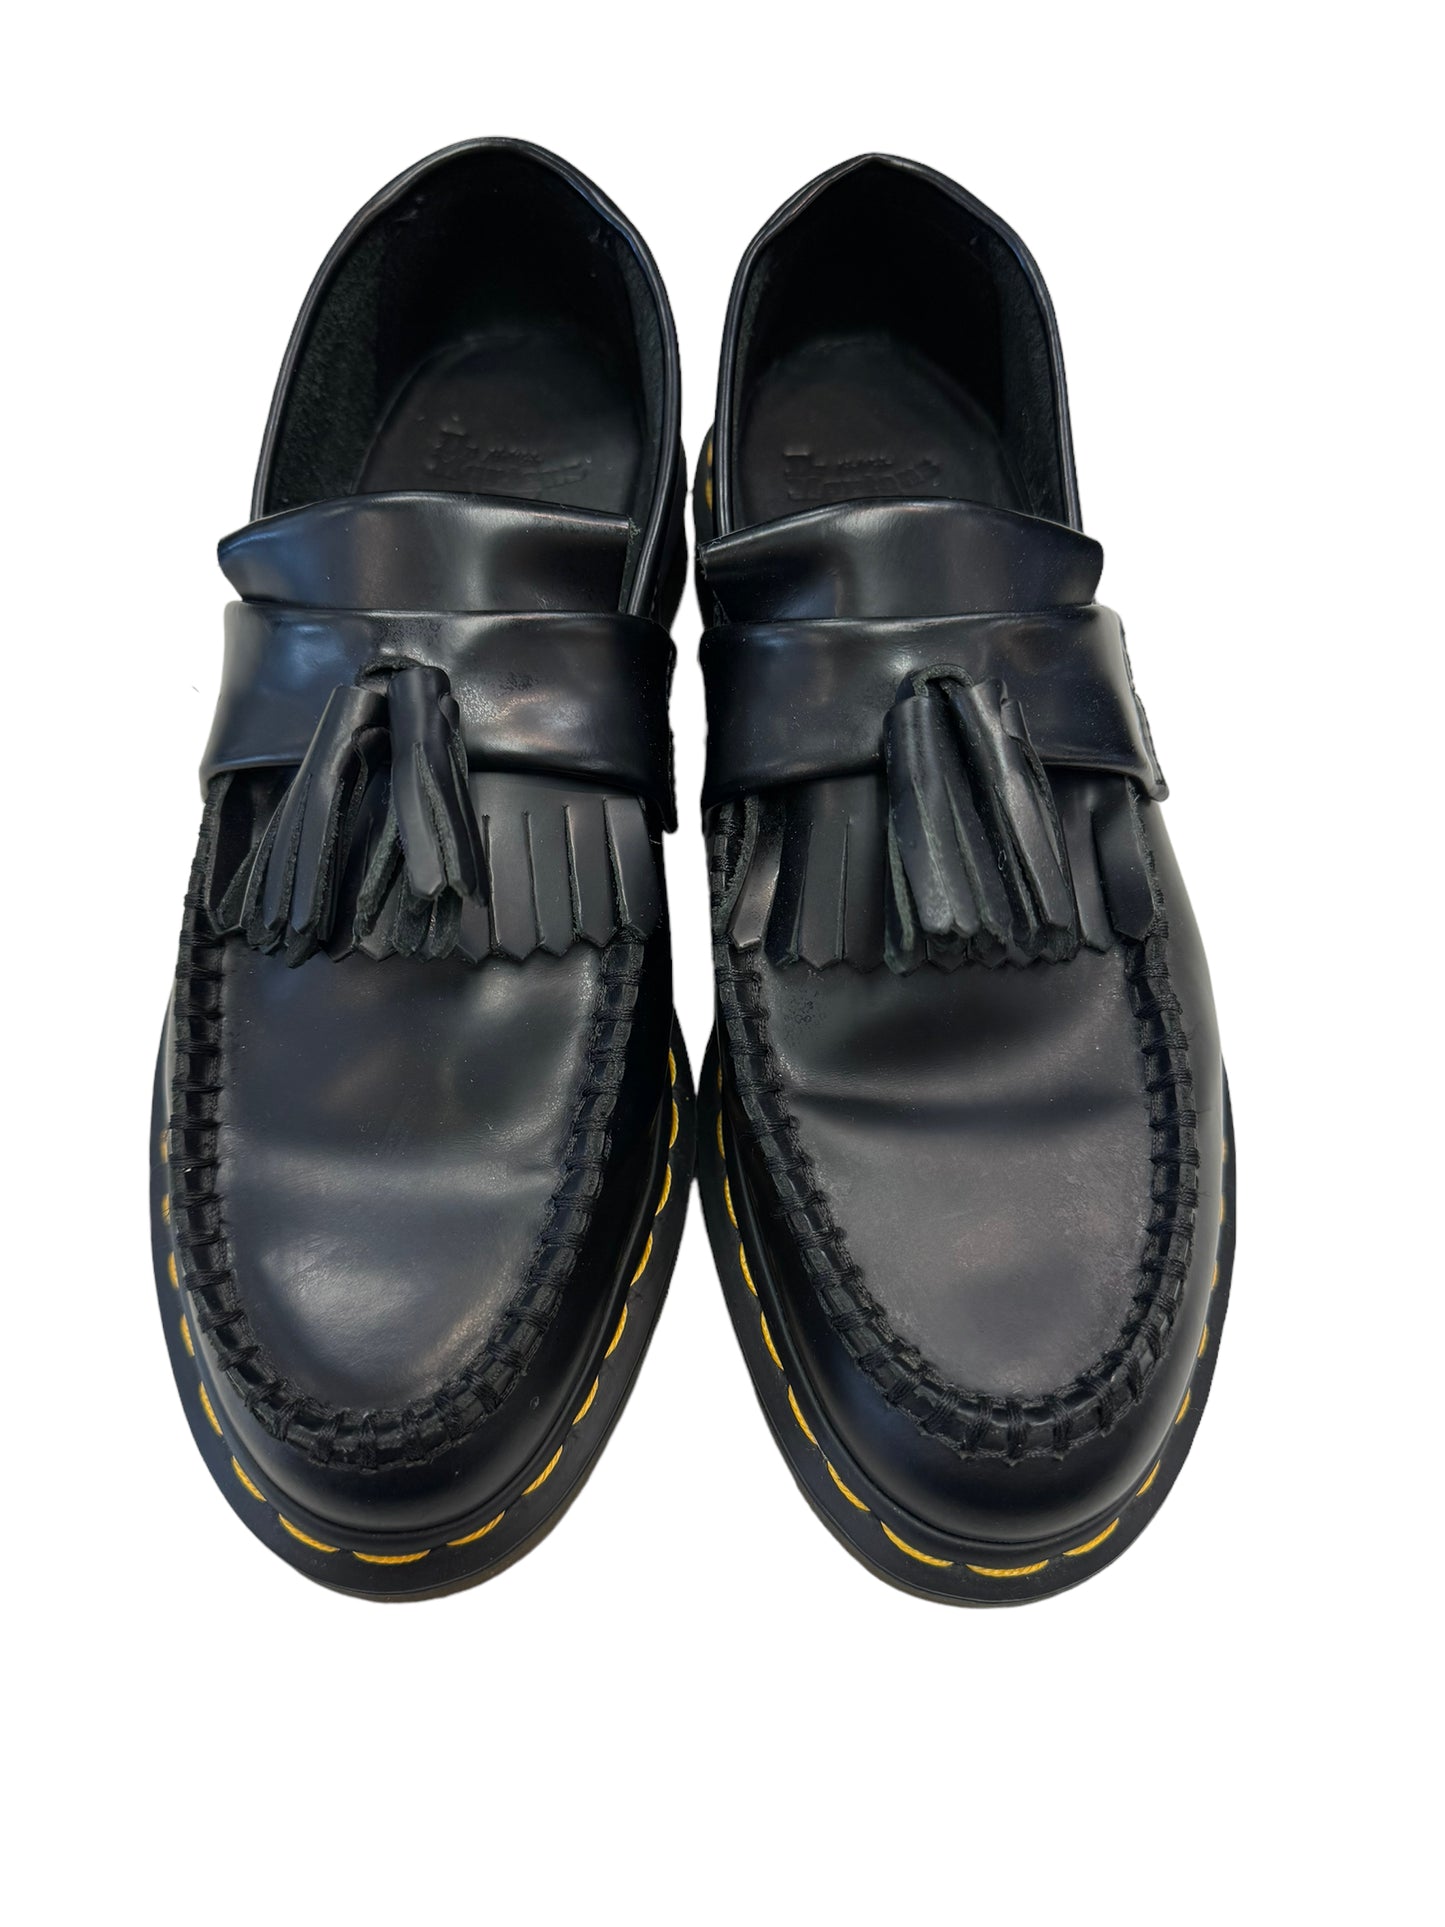 Shoes Flats By Dr Martens  Size: 8